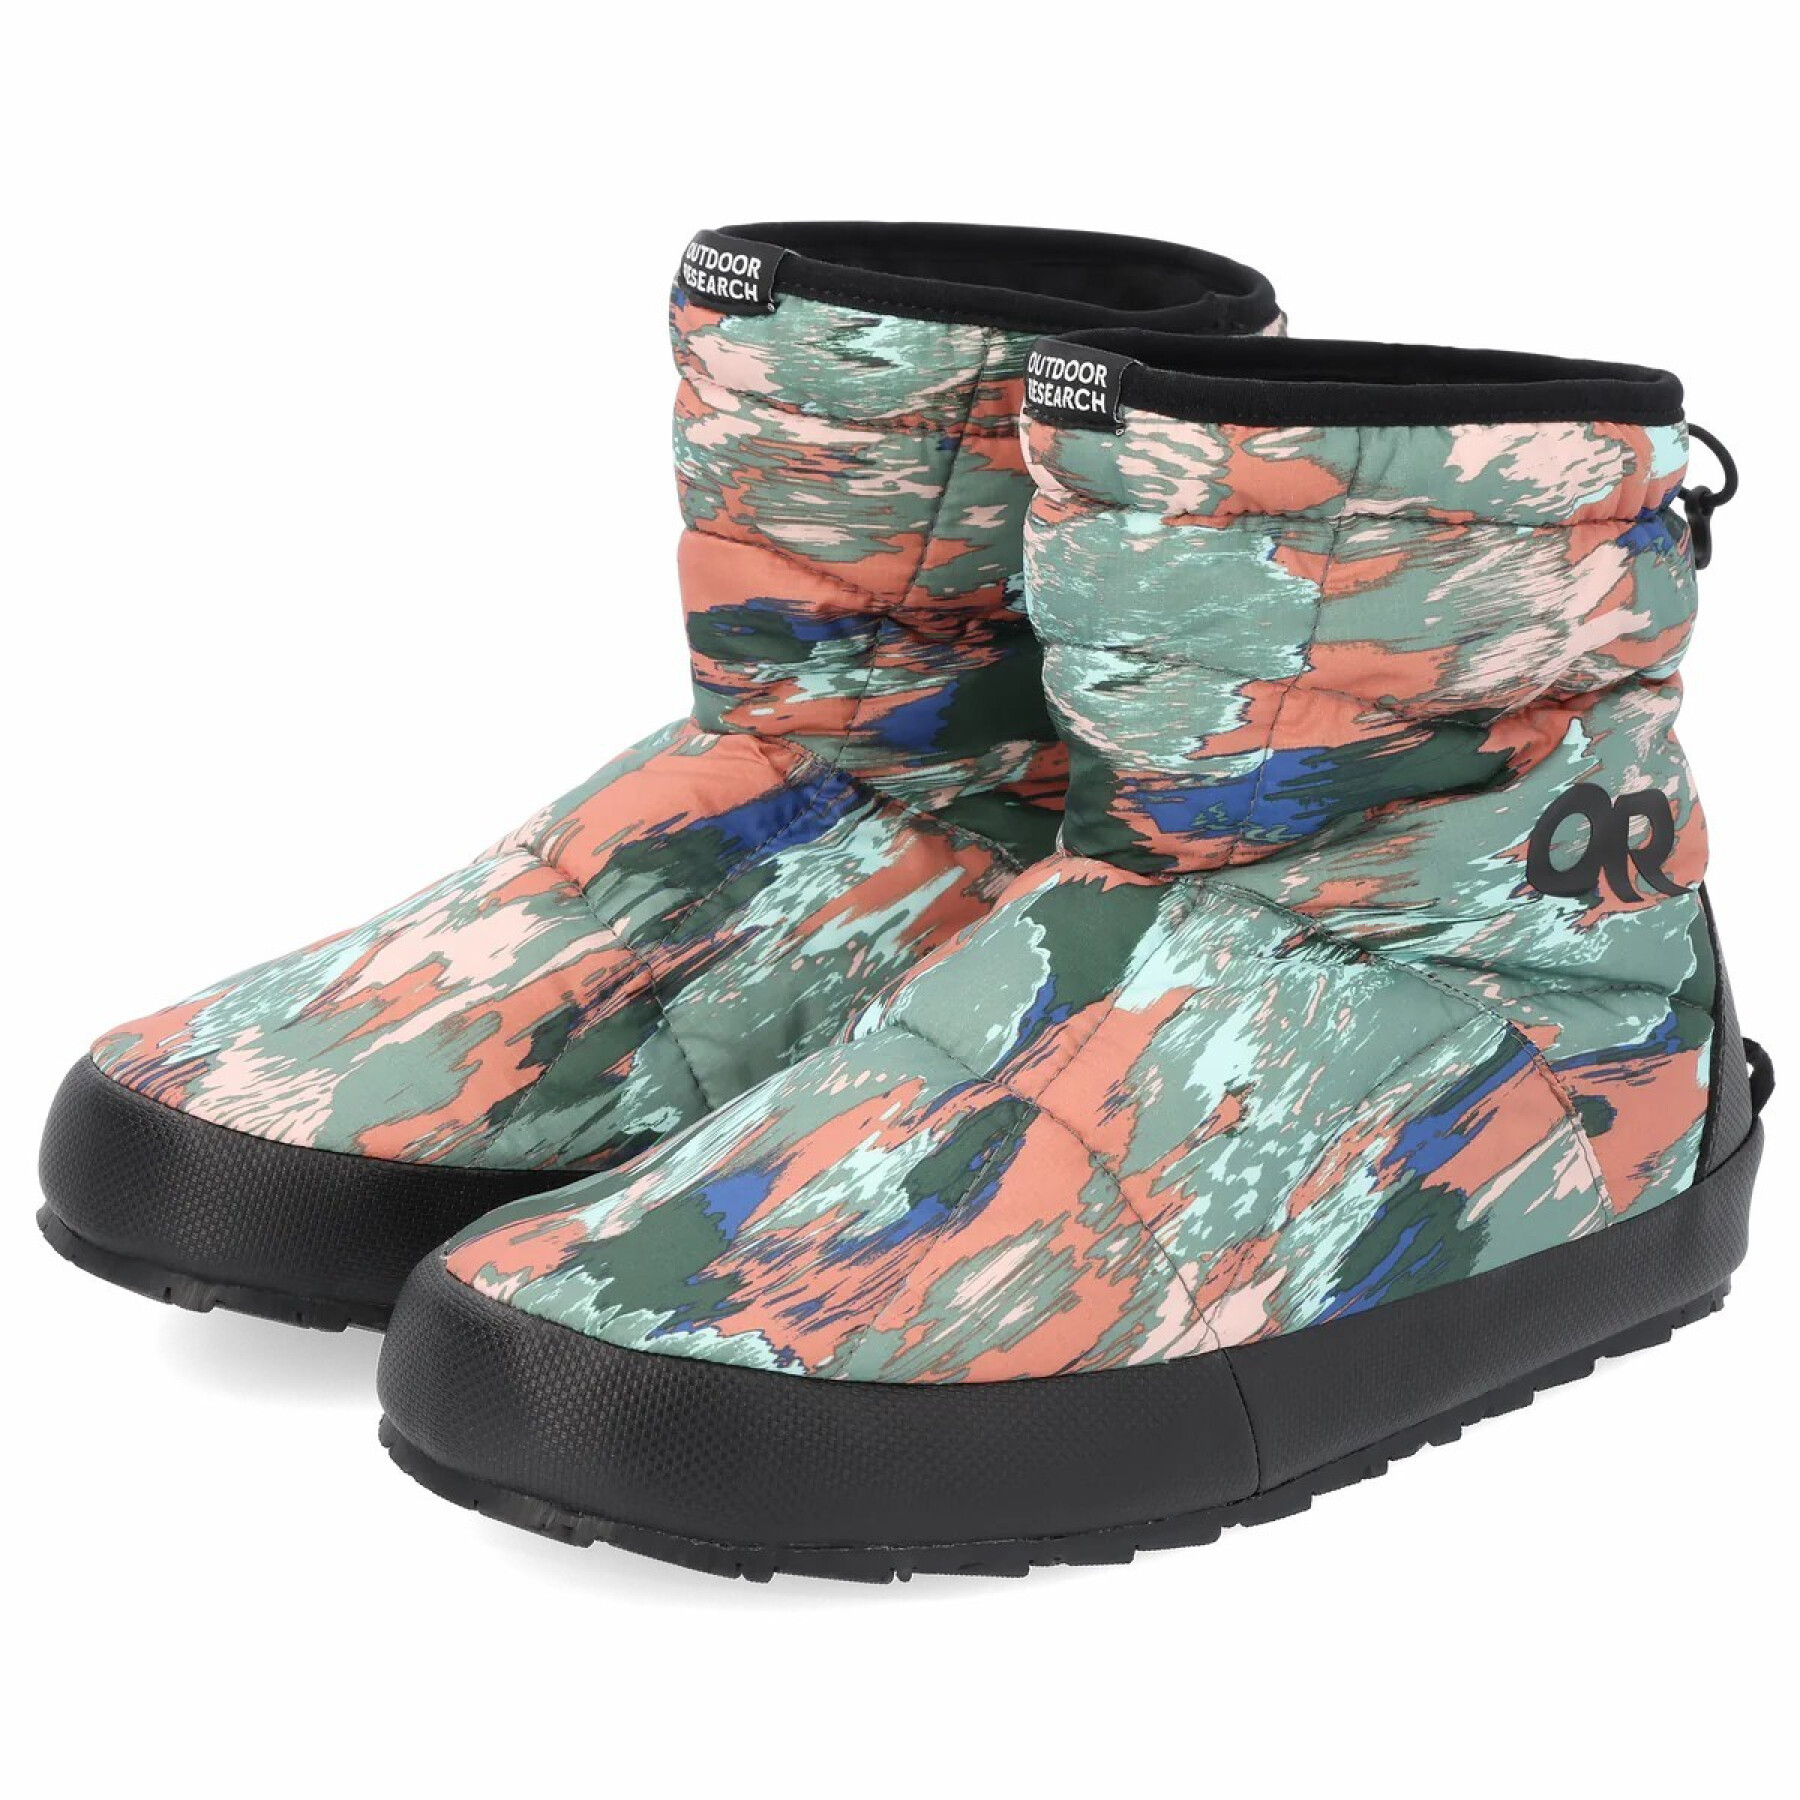 Women's boots Outdoor Research Tundra Trax